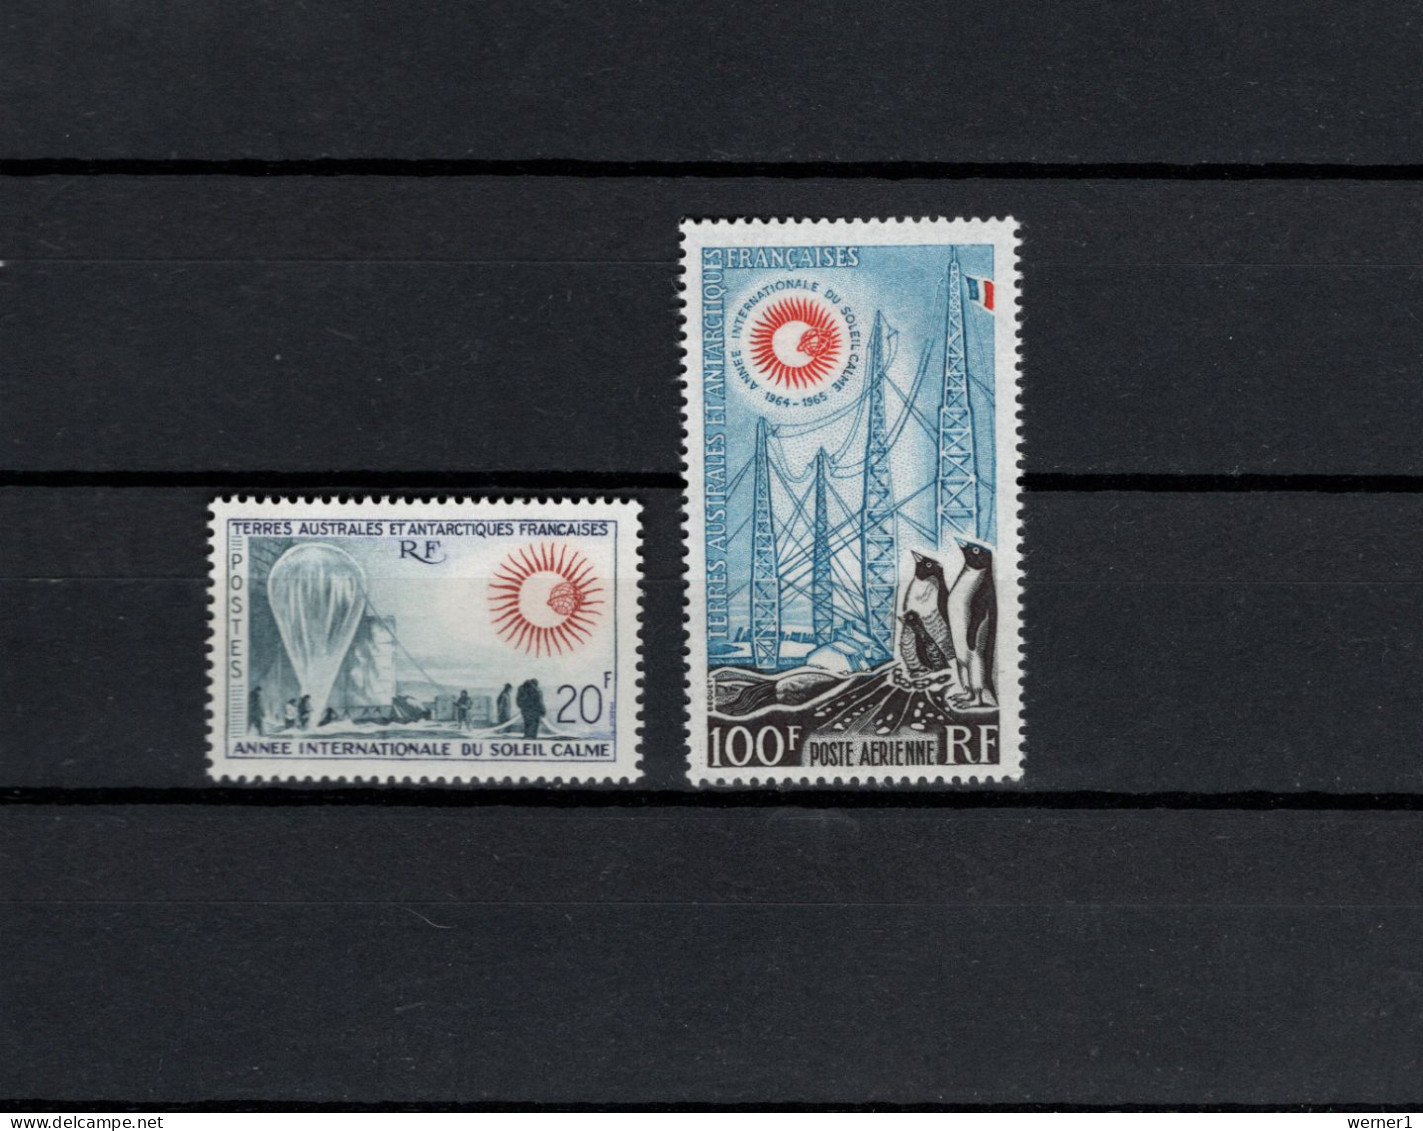 FSAT French Antarctic Territory 1963 Space, International Year Of The Quiet Sun Set Of 2 MNH -scarce- - Oceania